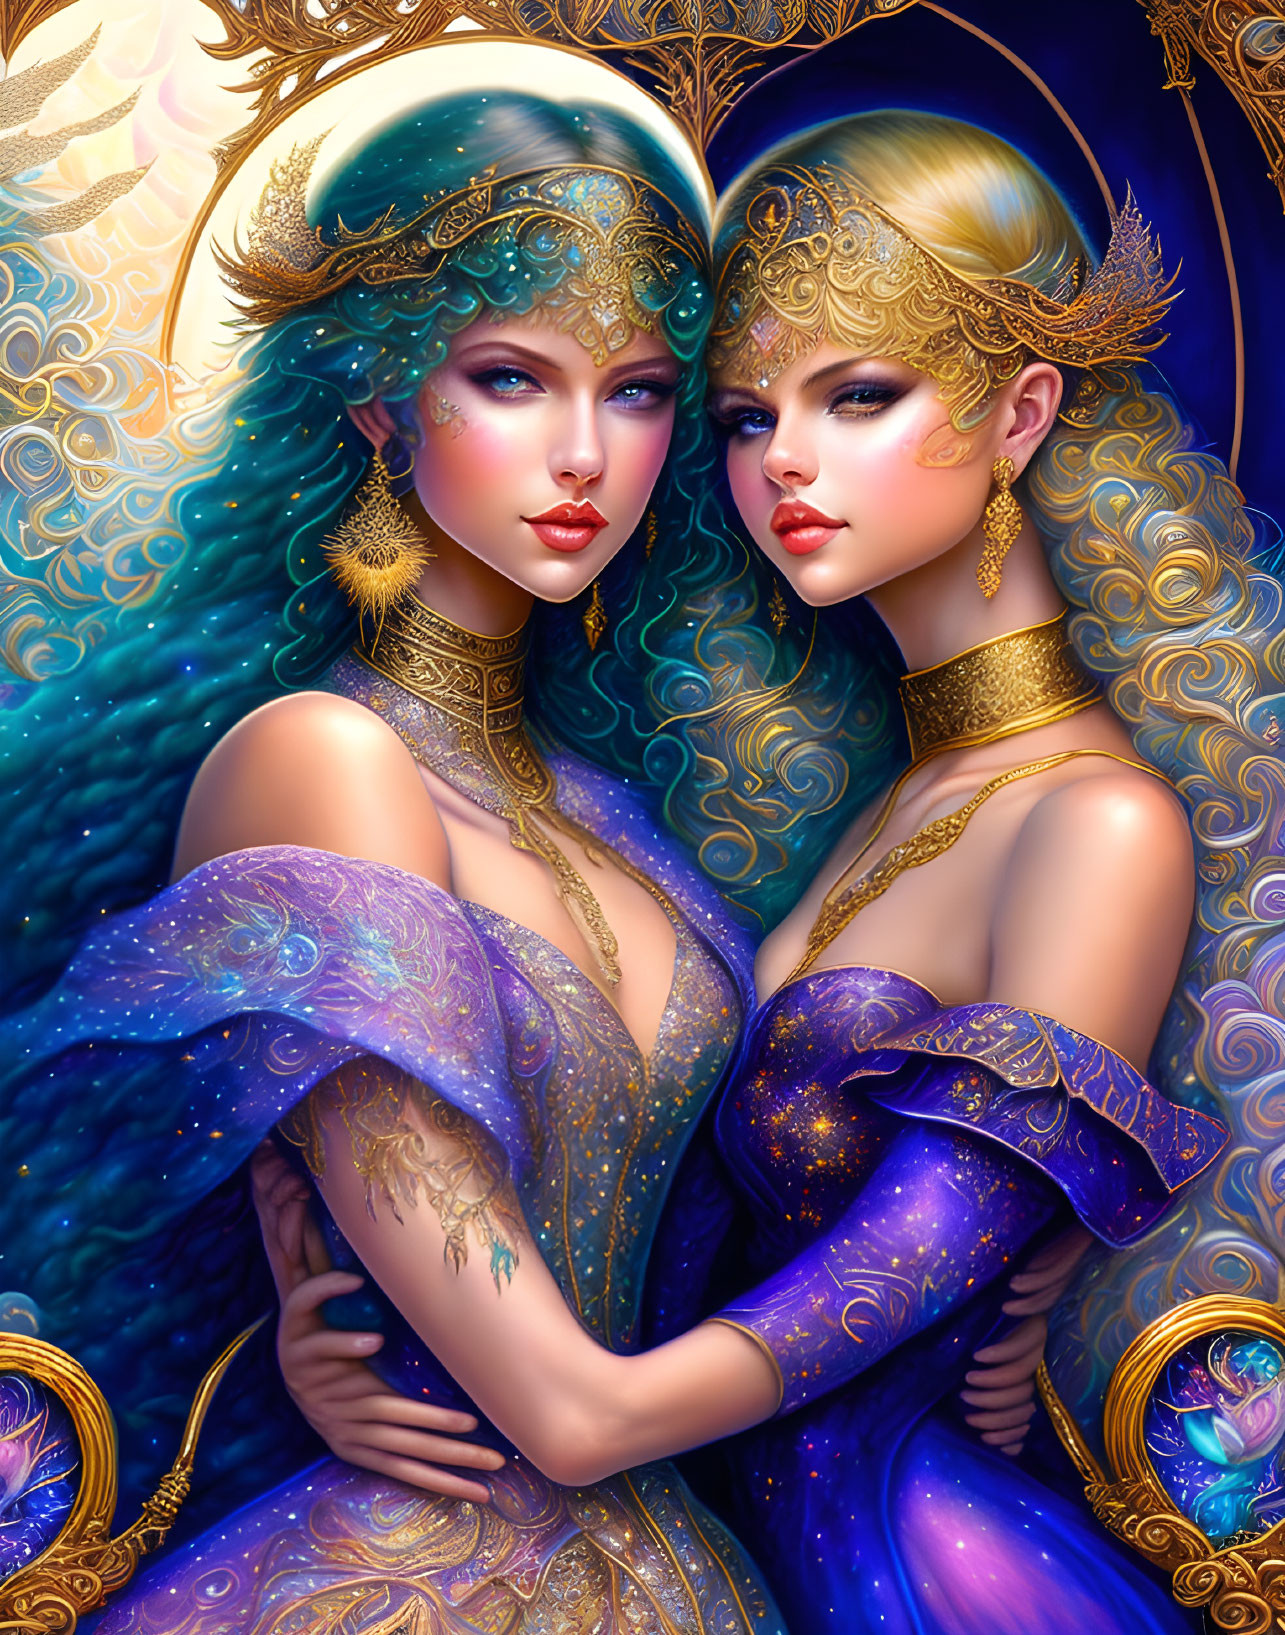 Two women with blue and blonde hair, golden crowns, and purple gowns in mystical embrace.